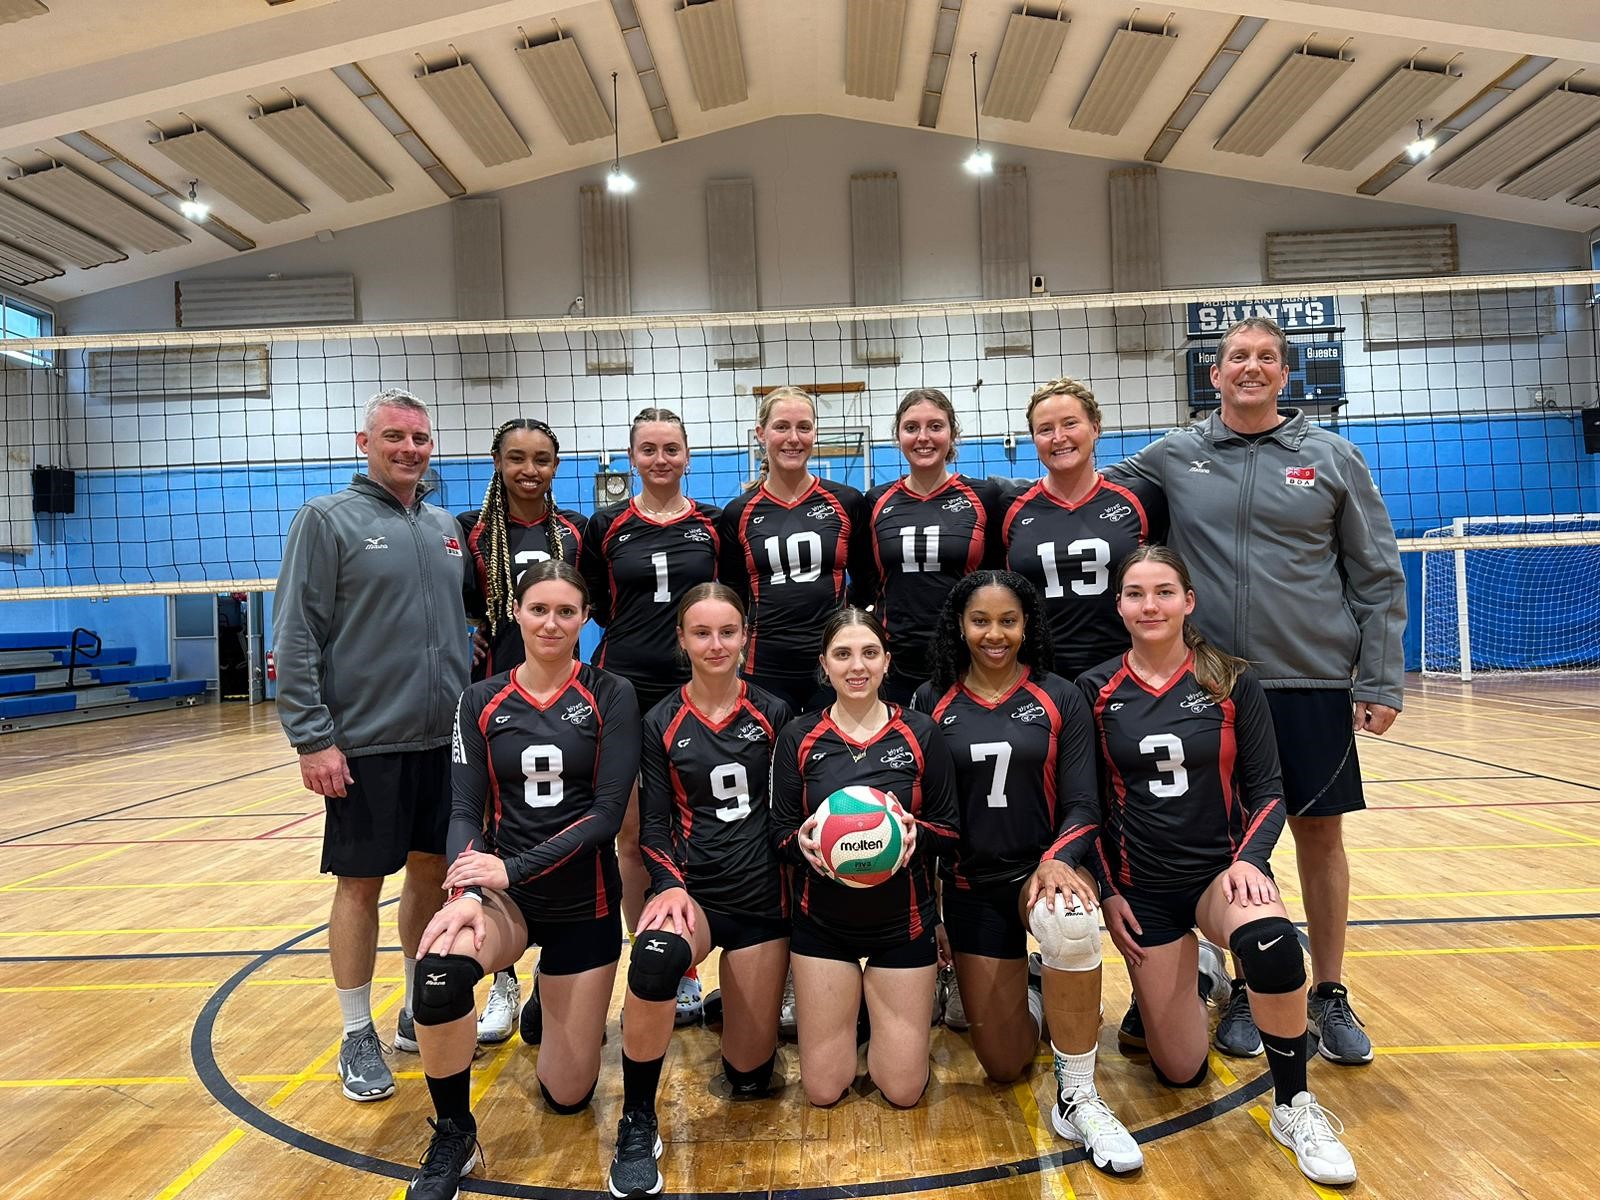 Bermuda Begin Competing in US Open Championships (Volleyball)